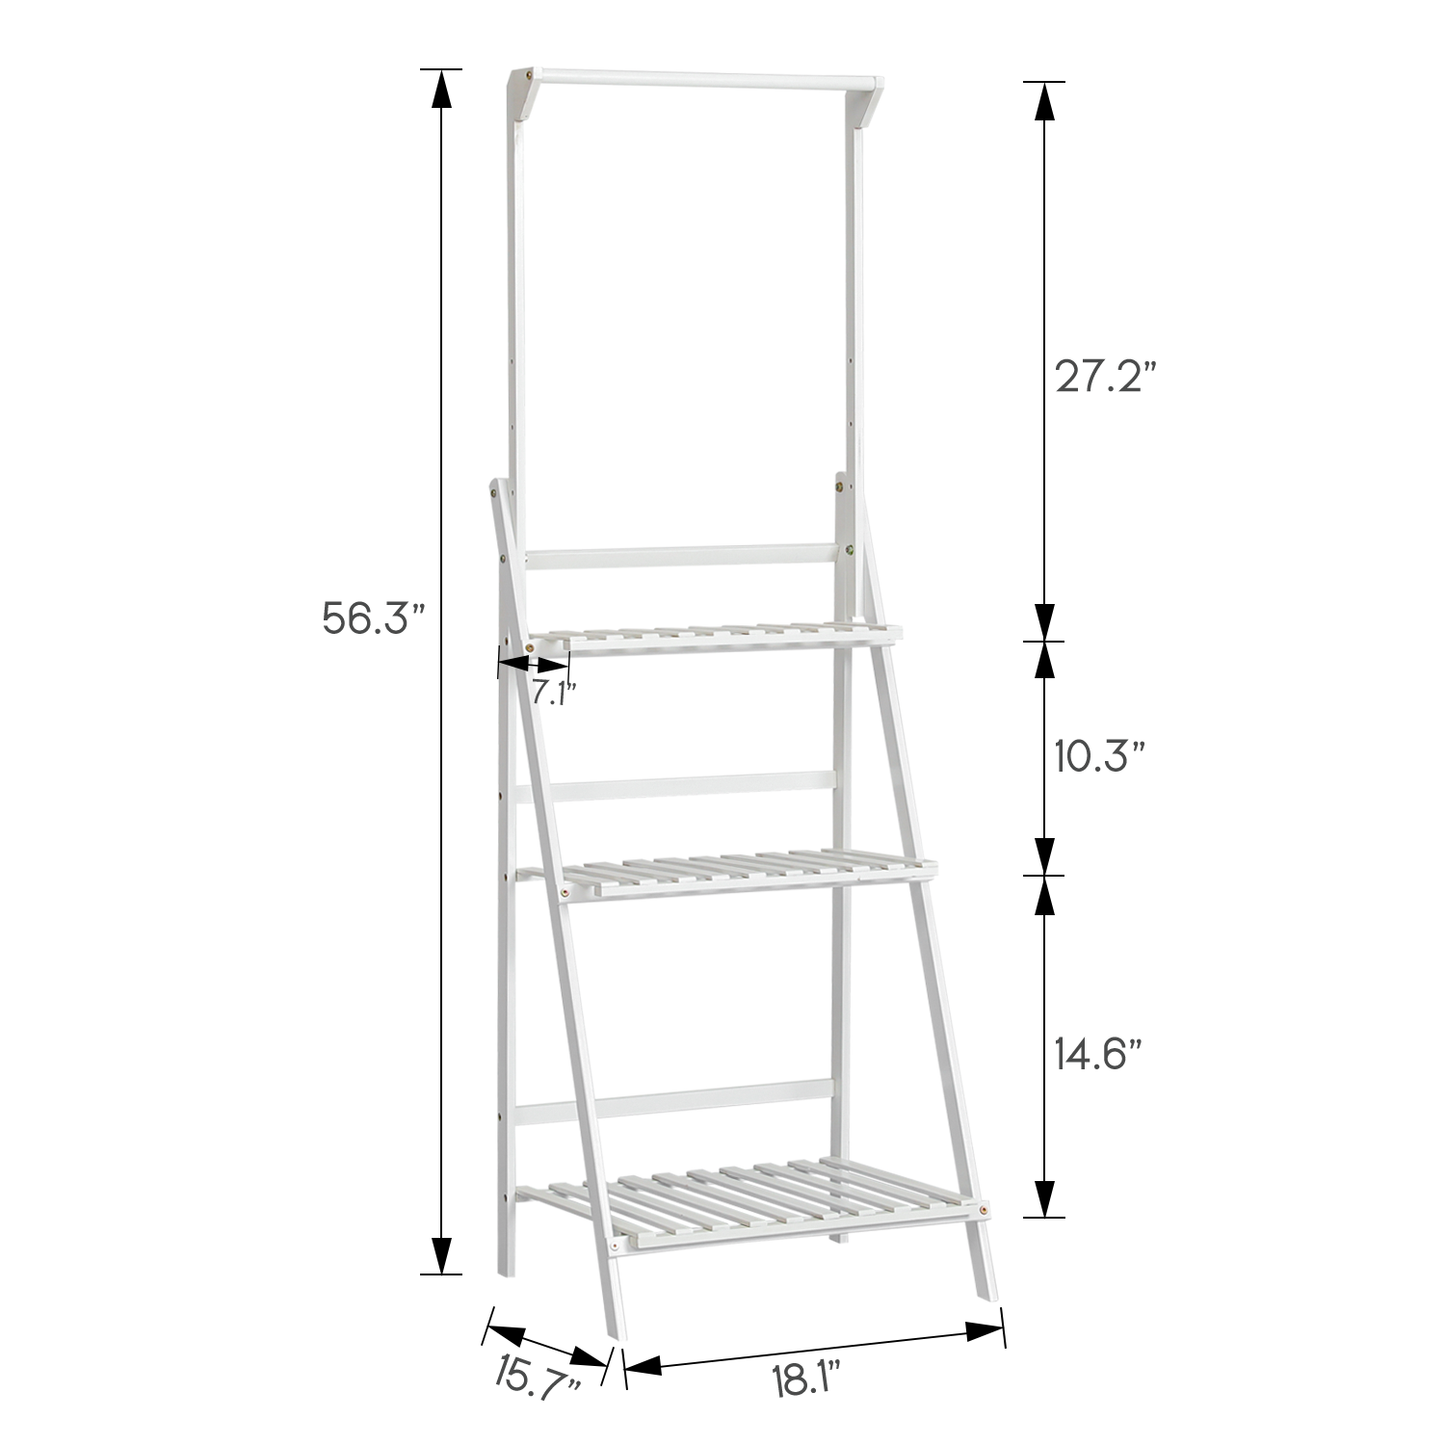 Foldable Flower Plant Rack - A Frame Stand Shelf - with Top Hanging Rod - 3 Tier - White